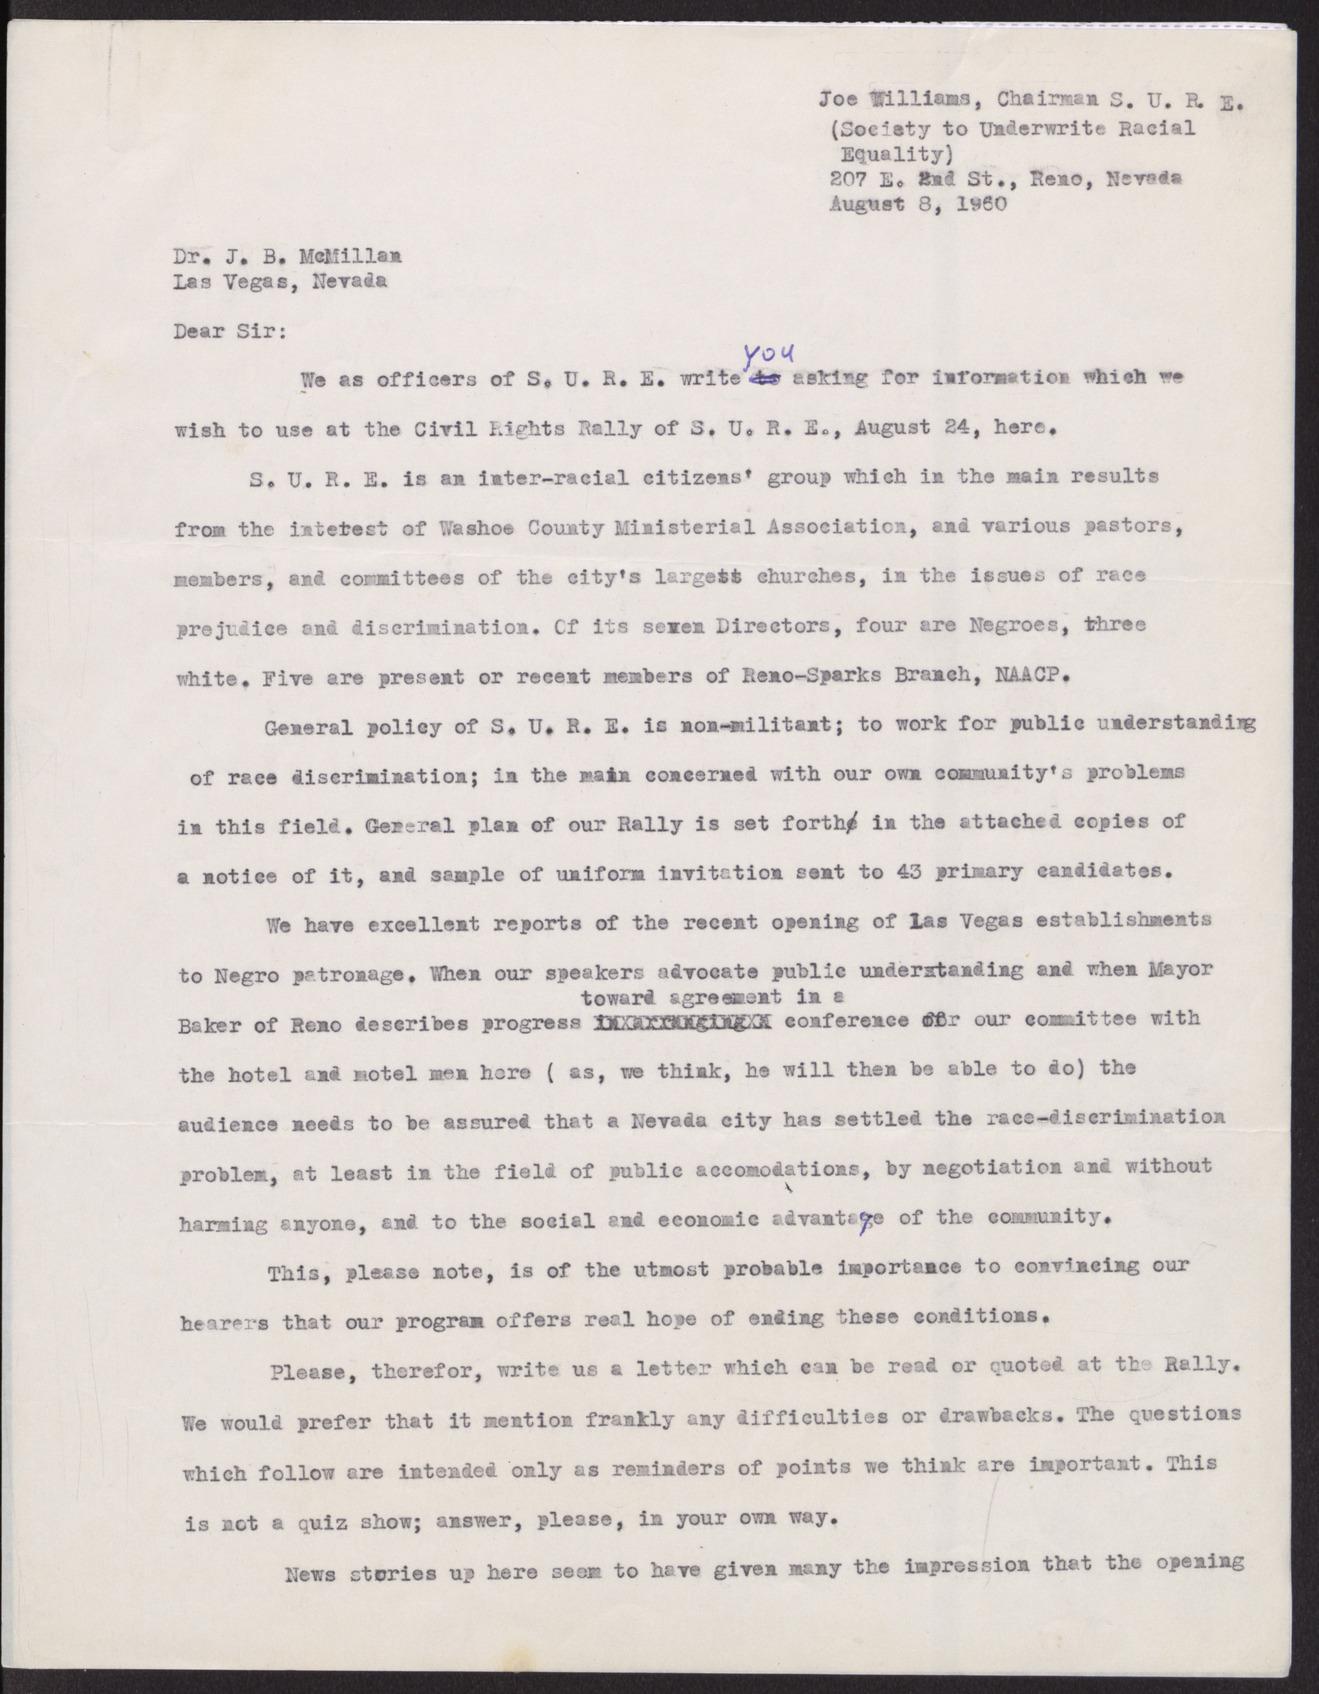 Letter to Dr. J. B. McMillan from R. G. Benedict and Joe Williams (2 pages) August 8, 1960